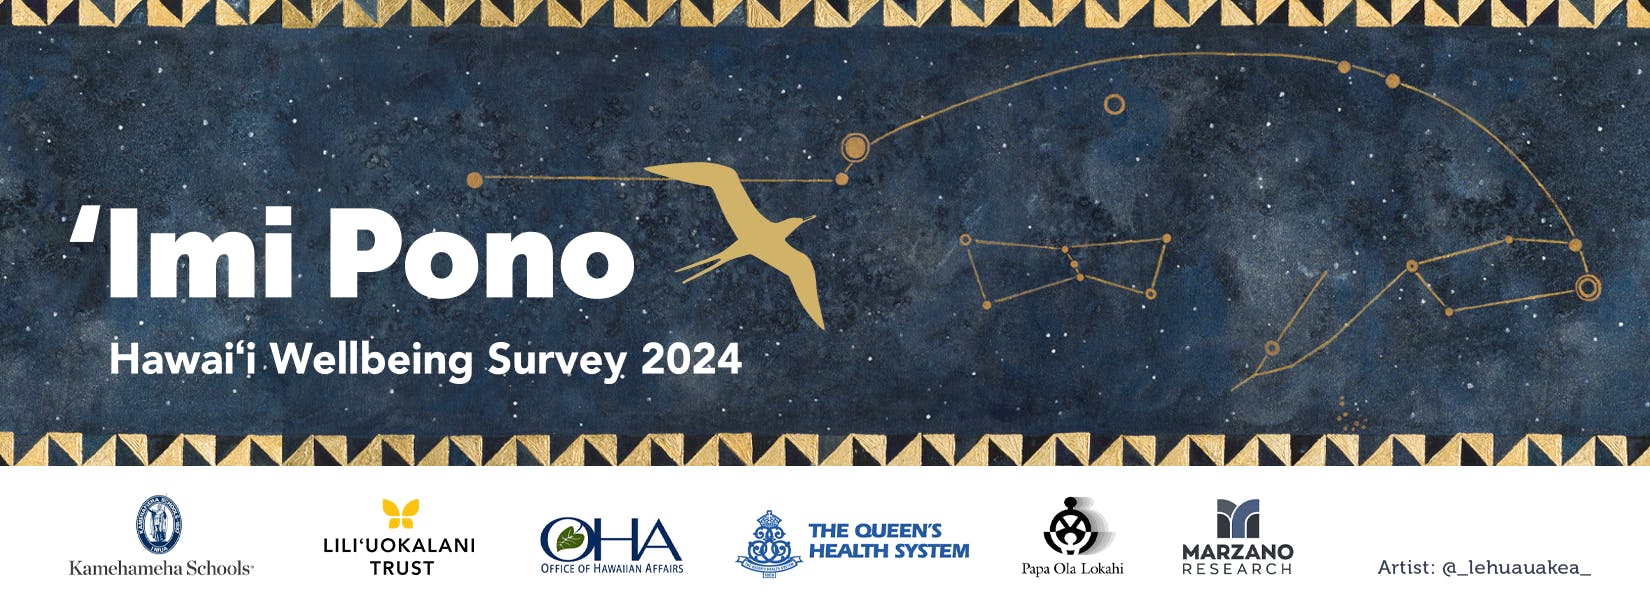 ʻImi Pono Hawaii Wellbeing Survey 2024 image with partner logos.